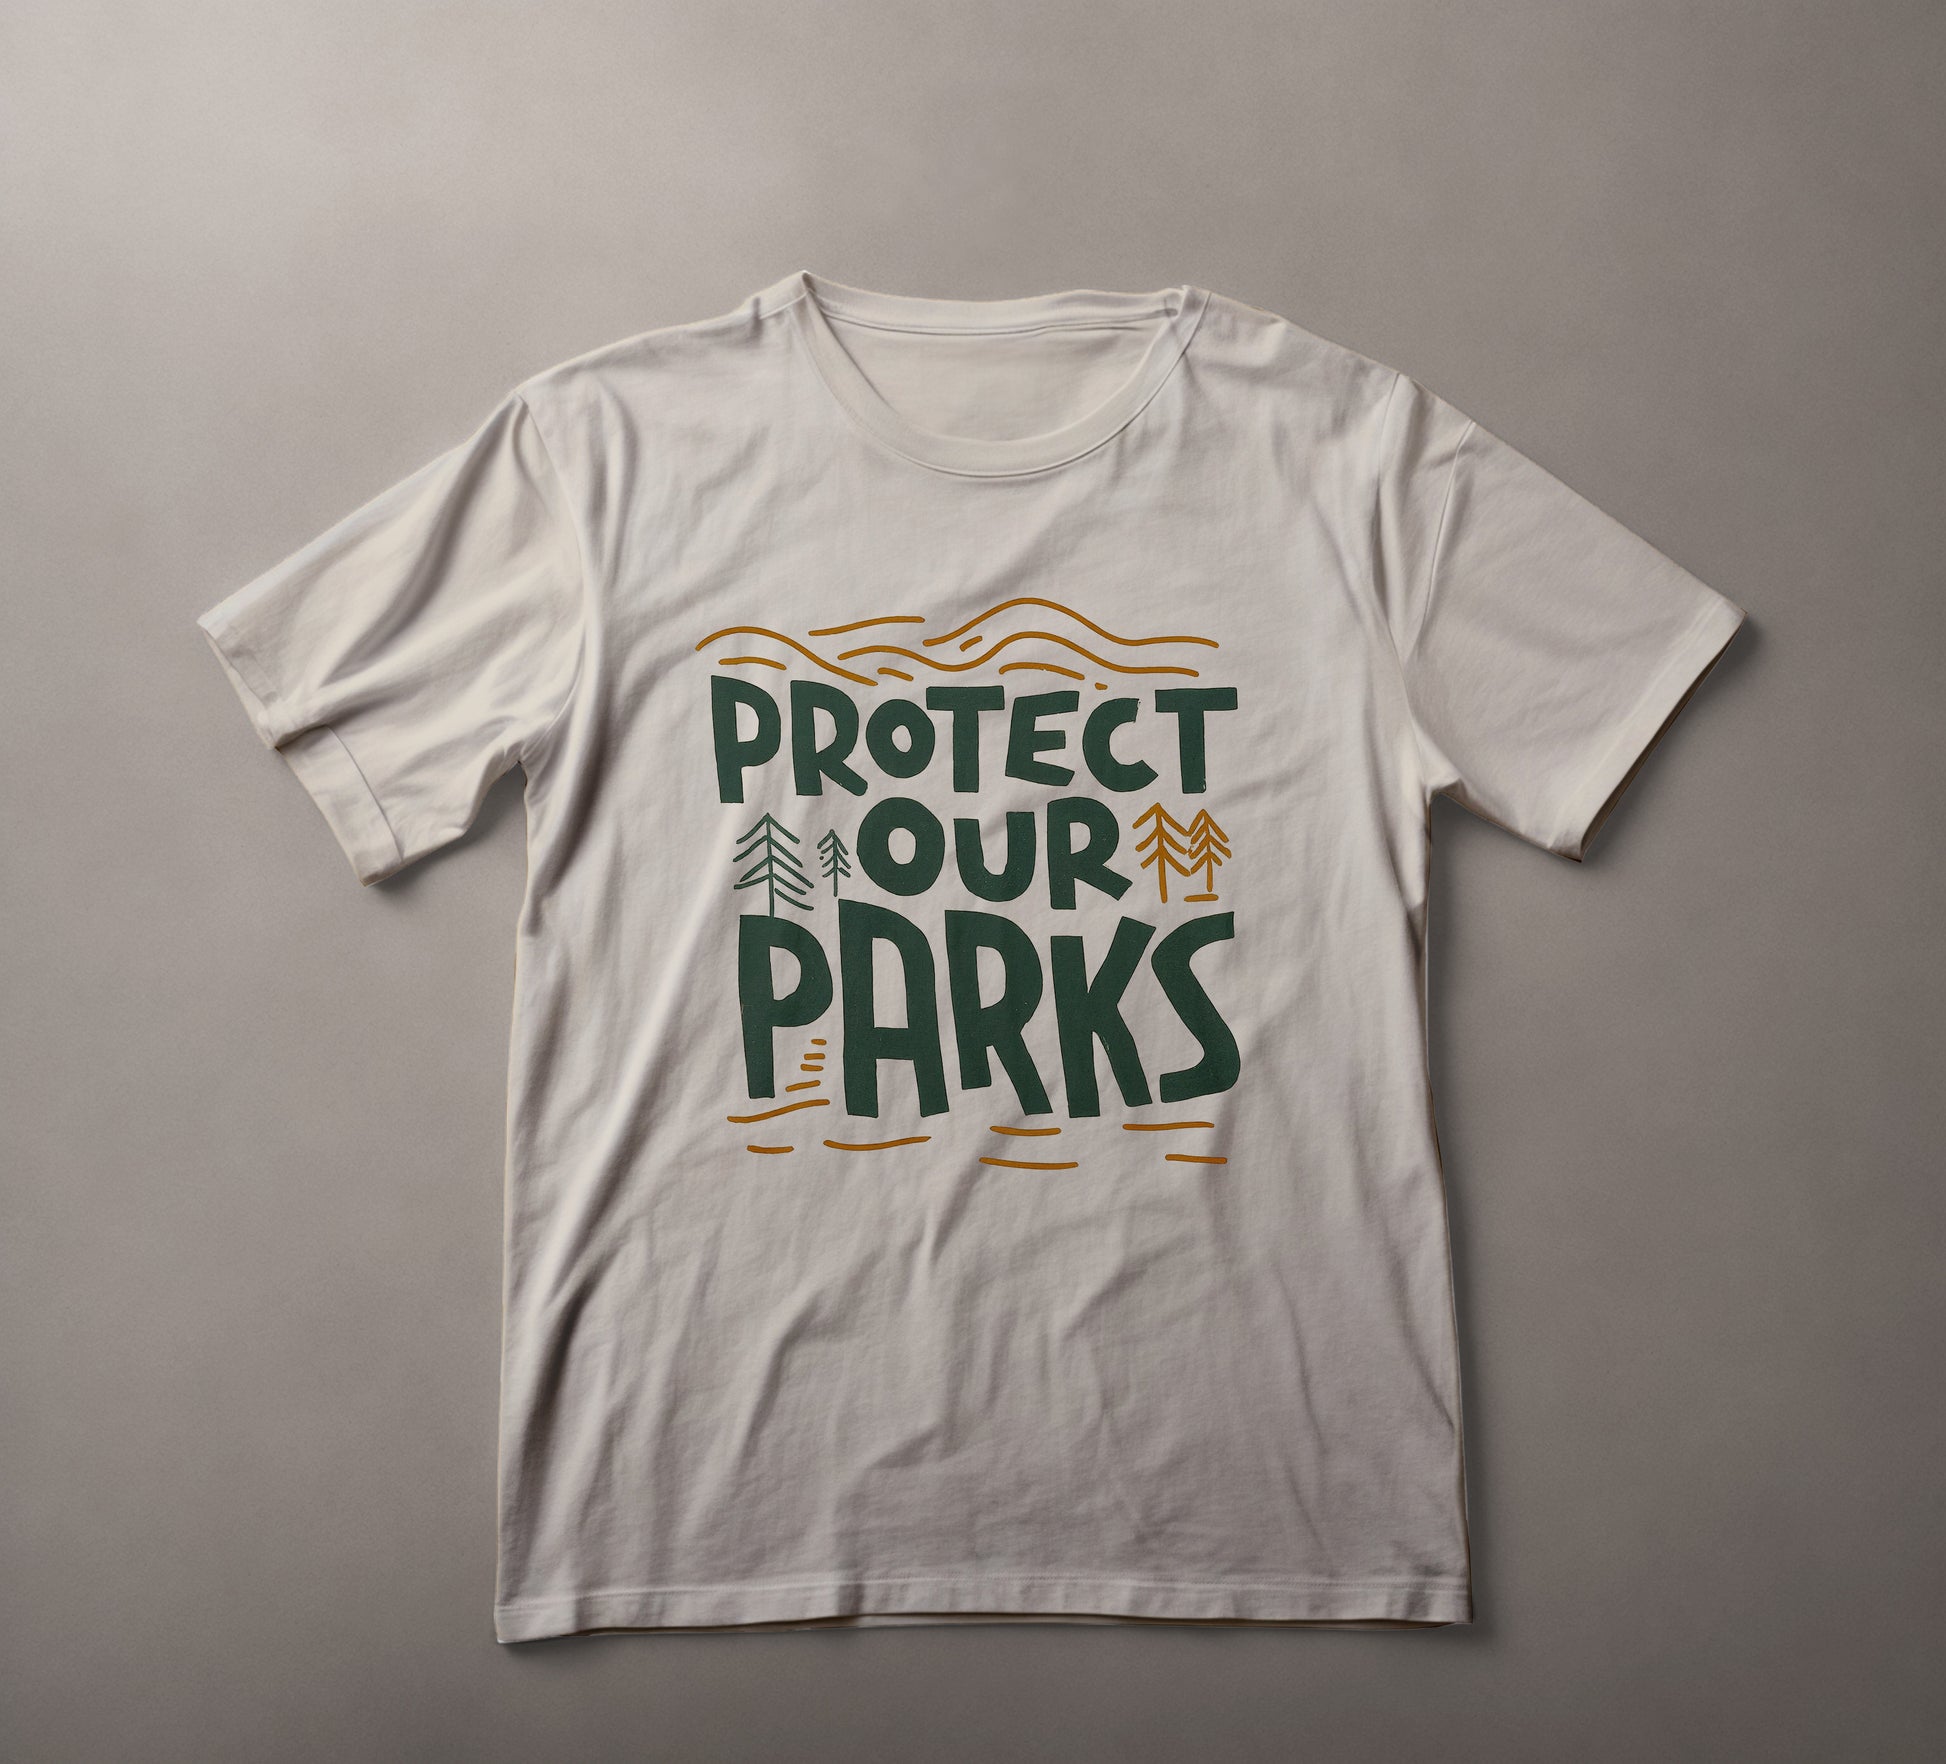 Environmental Conservation Shirt, Protect National Parks Tee, Nature Preservation Apparel, Eco-Friendly Clothing, Sustainable Fashion T-shirt, Outdoor Activism Wear, Conservationist Gear, Green Movement Merchandise, Eco Warrior Top, Park Preservation Message Tee